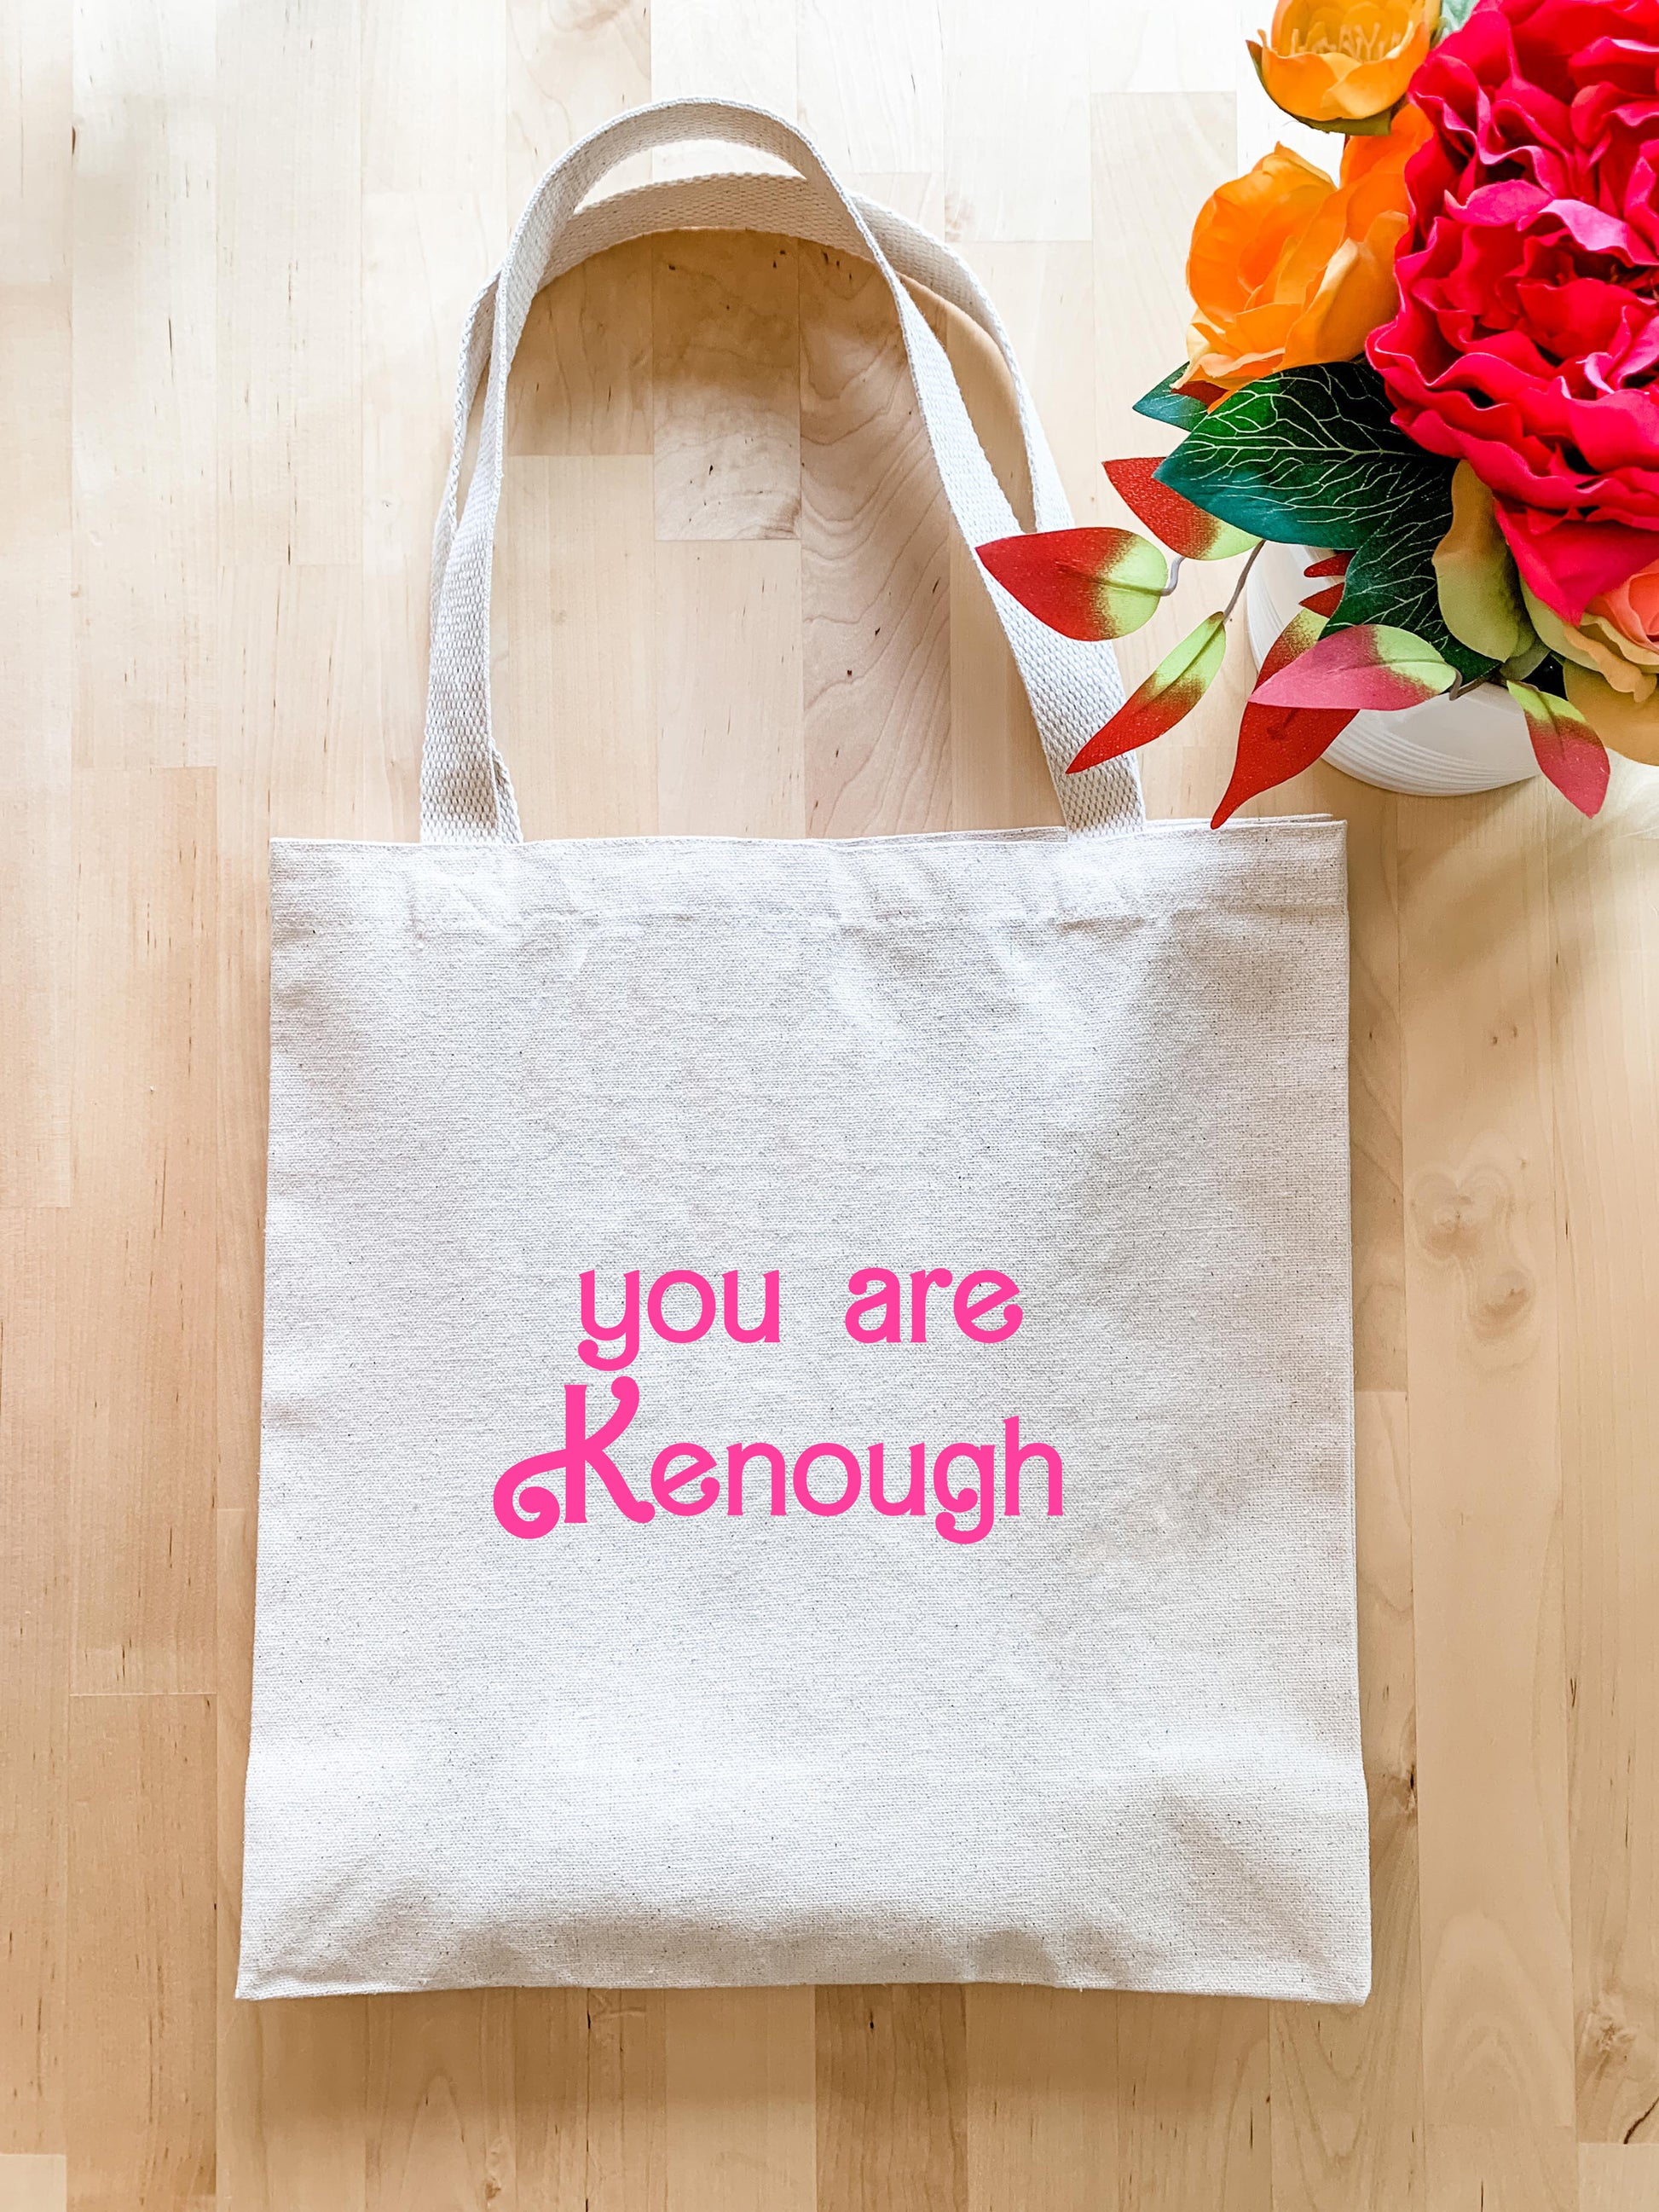 a white tote bag with the words you are kenouh printed on it